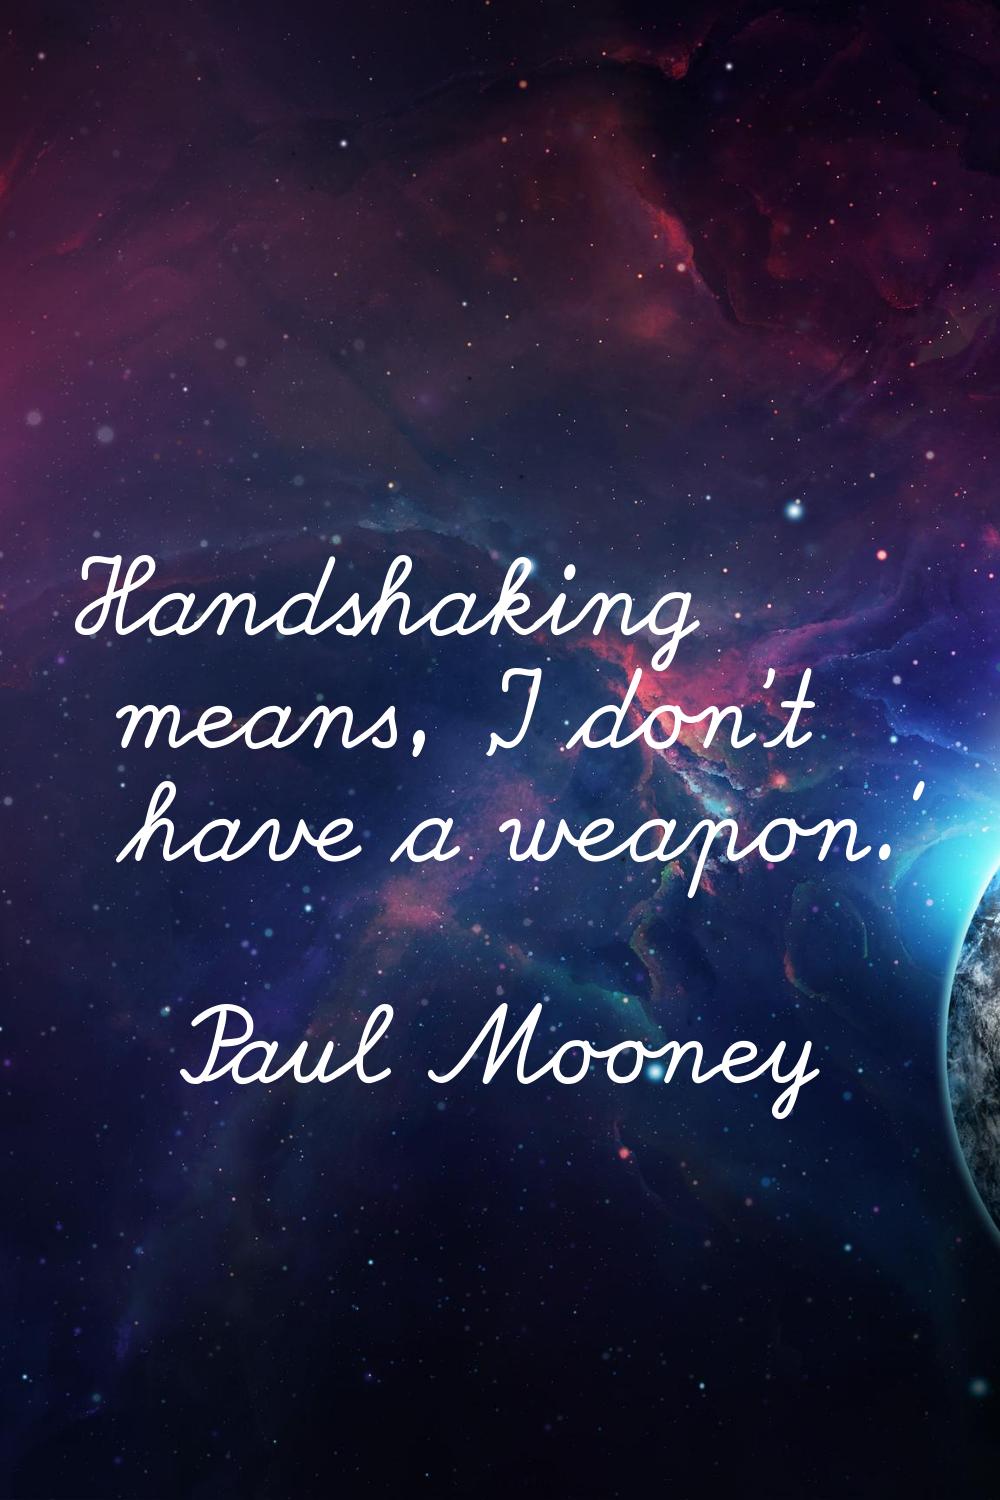 Handshaking means, 'I don't have a weapon.'